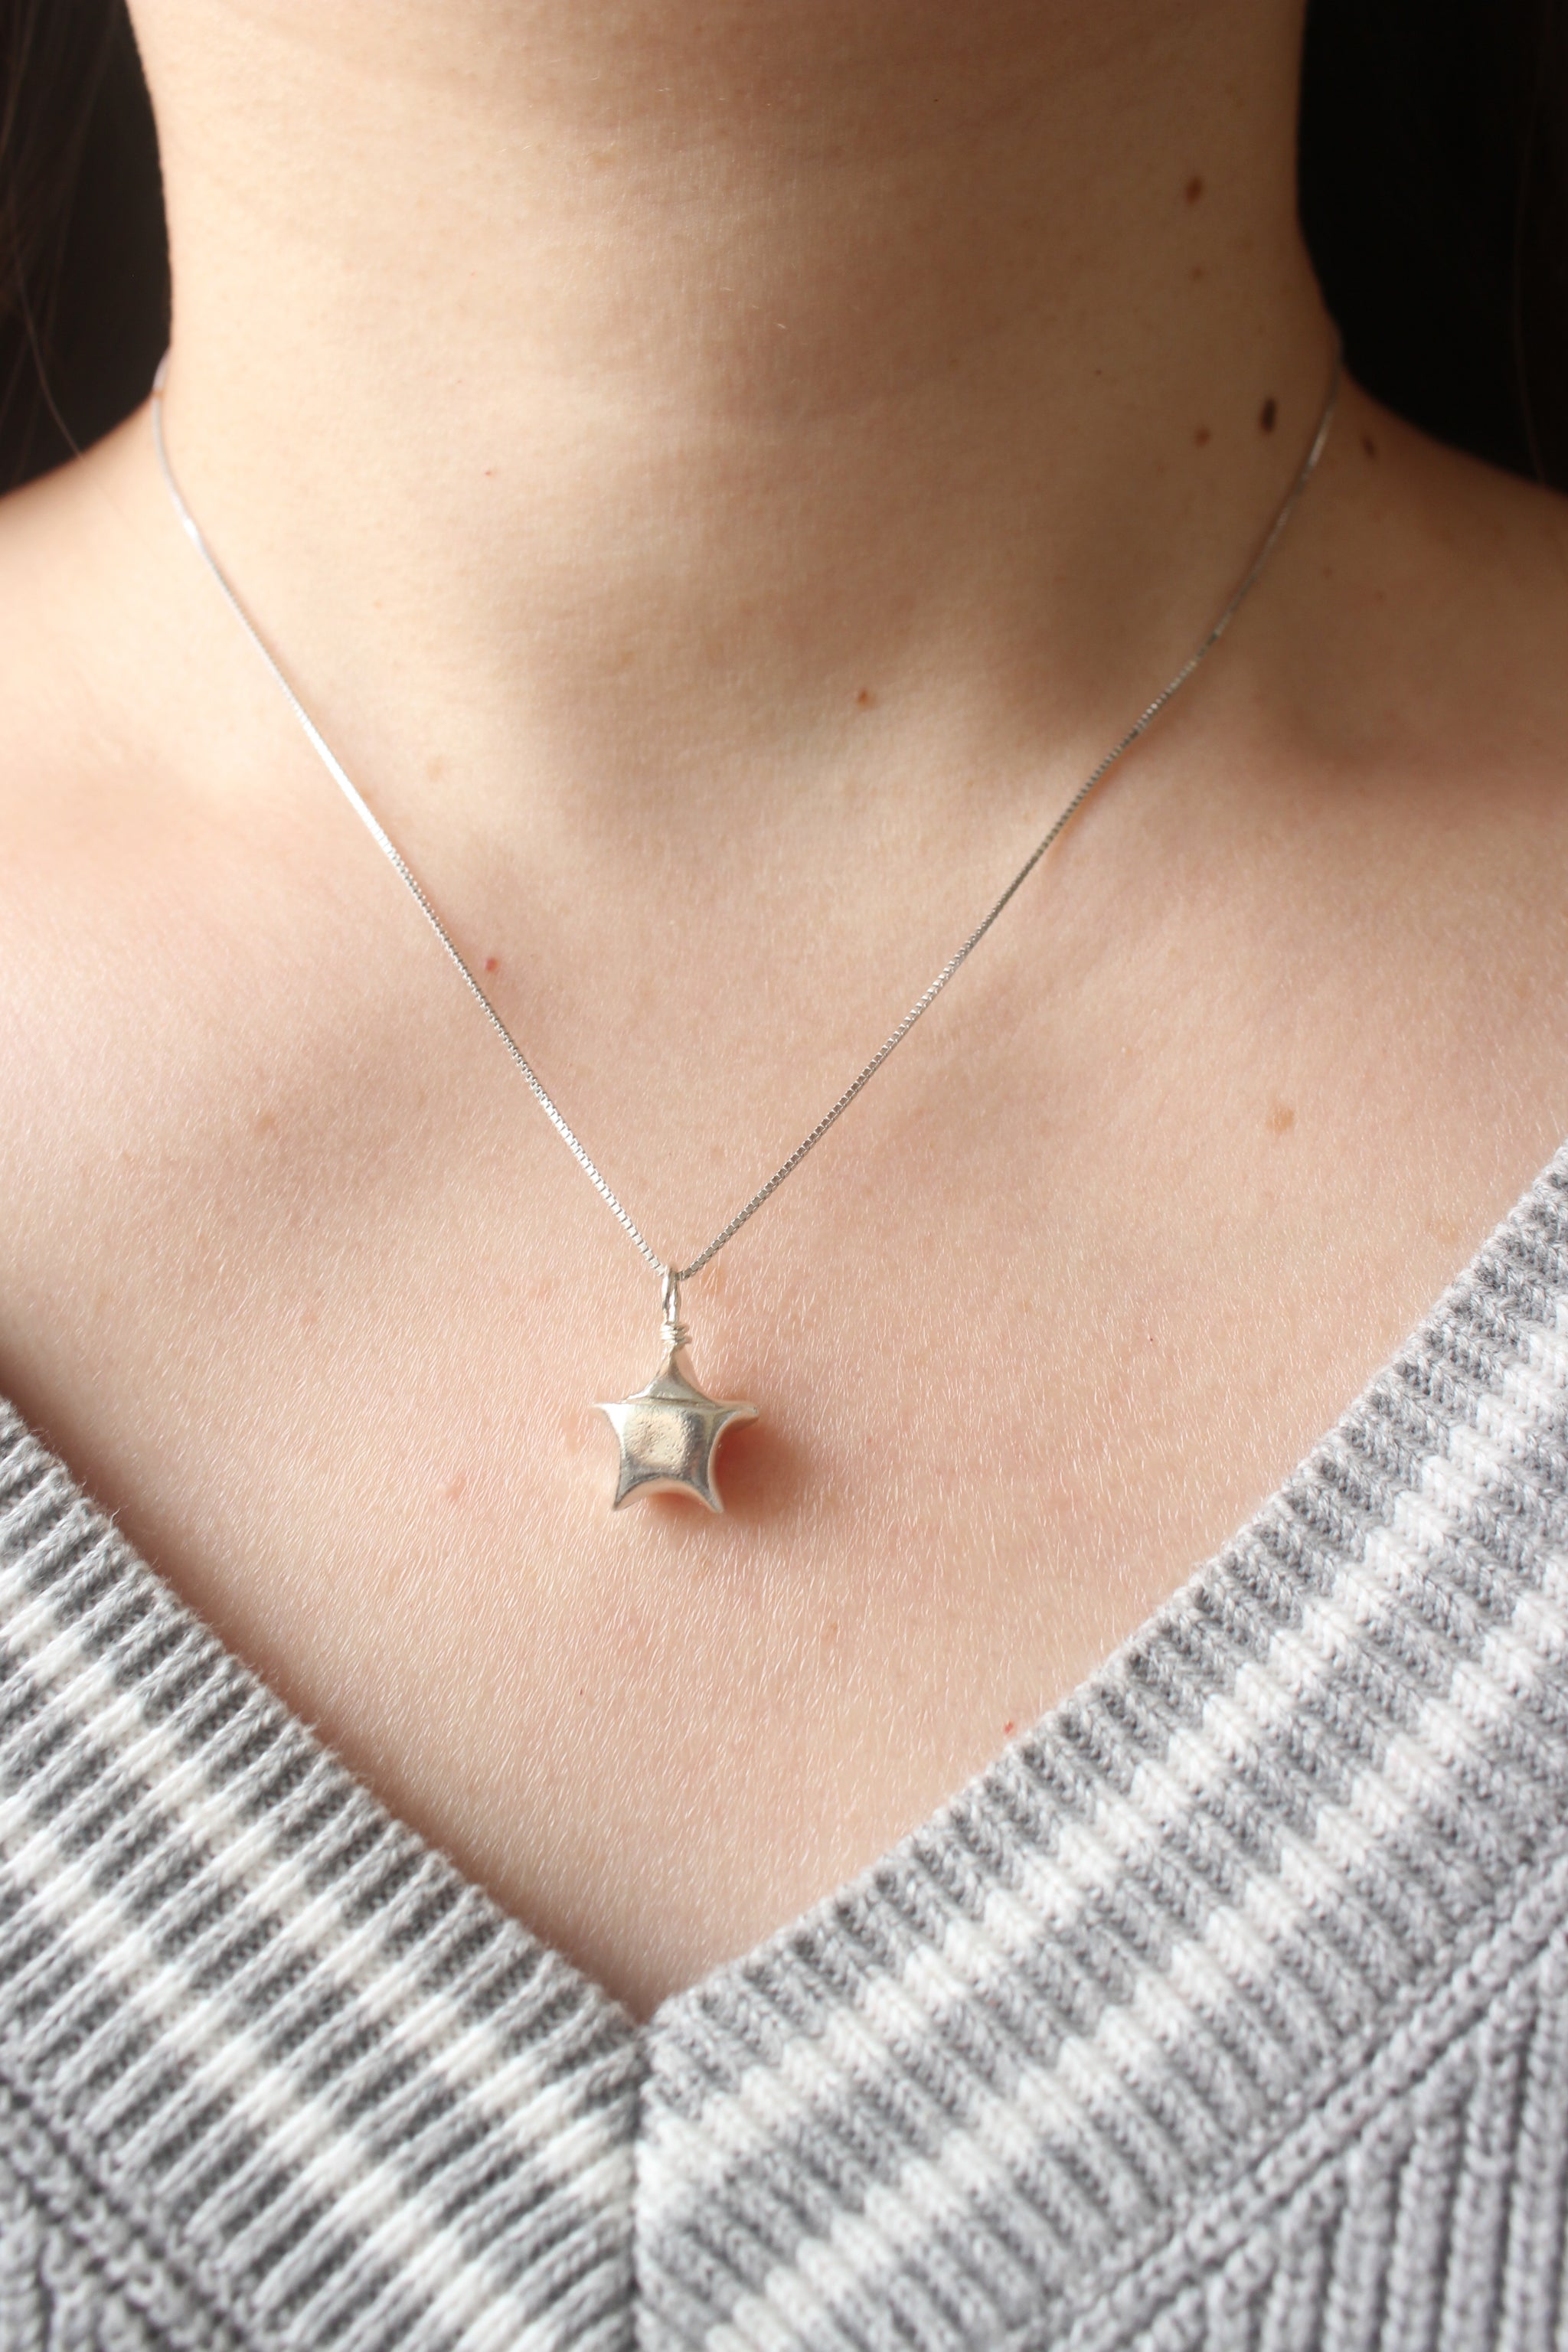 Silver Lucky Star Necklace/Origami Star Silver Necklace/Paper Star Necklace